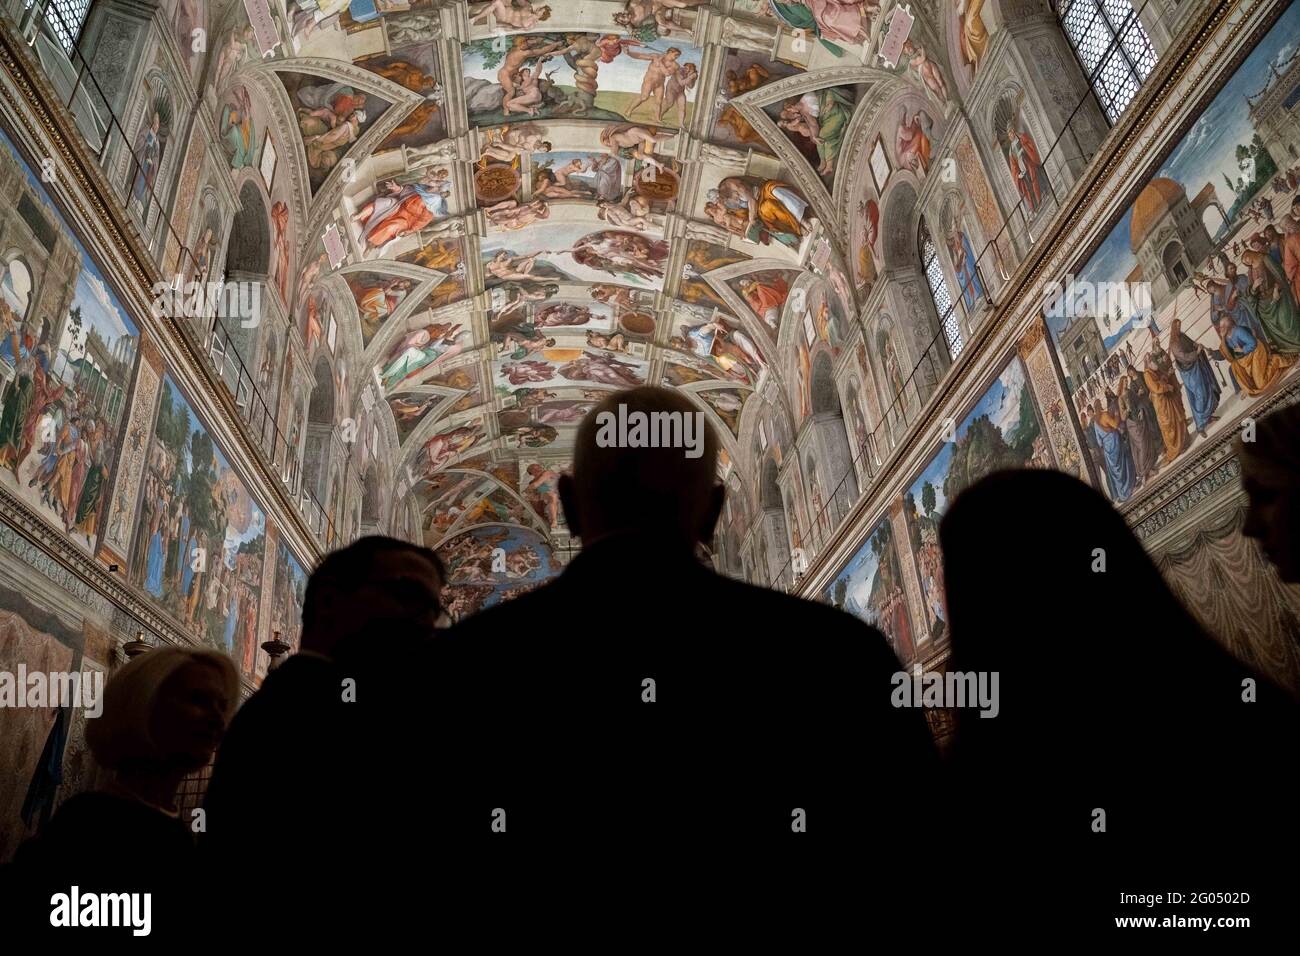 Vice President Mike Pence and Mrs. Pence participate in a tour Friday, Jan. 24, 2020, at the Vatican. Stock Photo